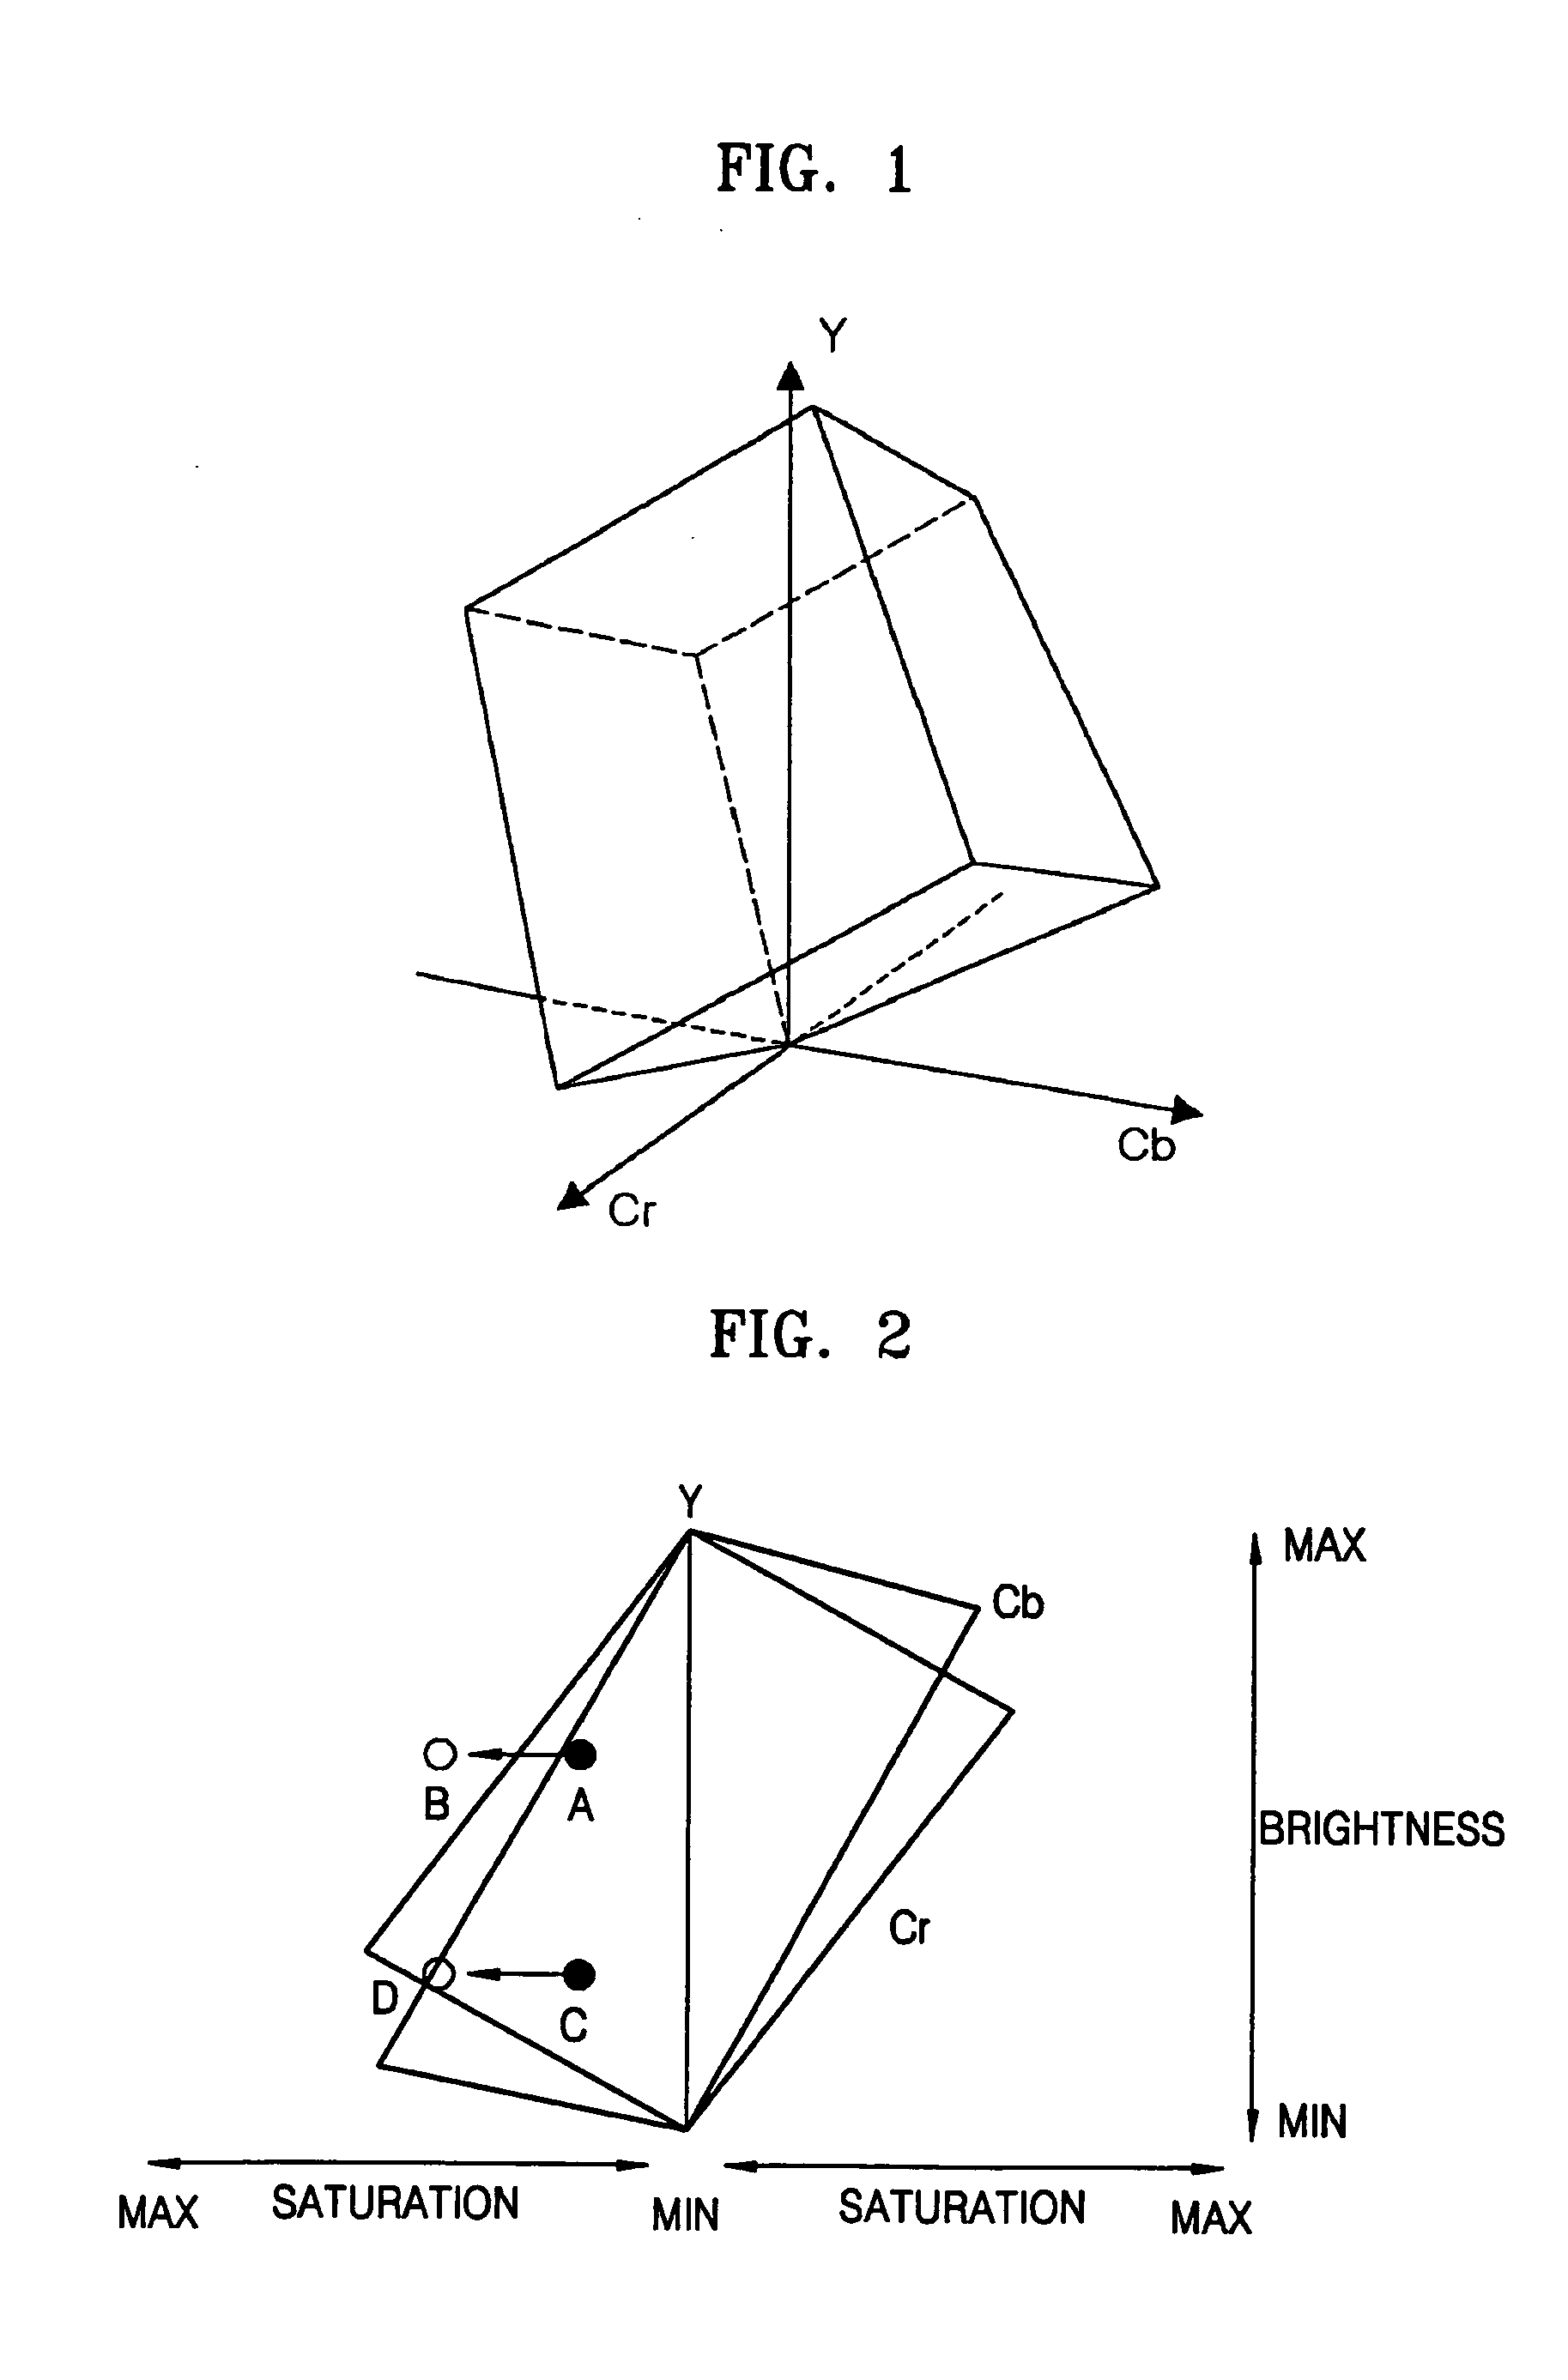 Apparatus and method for controlling colors of color image